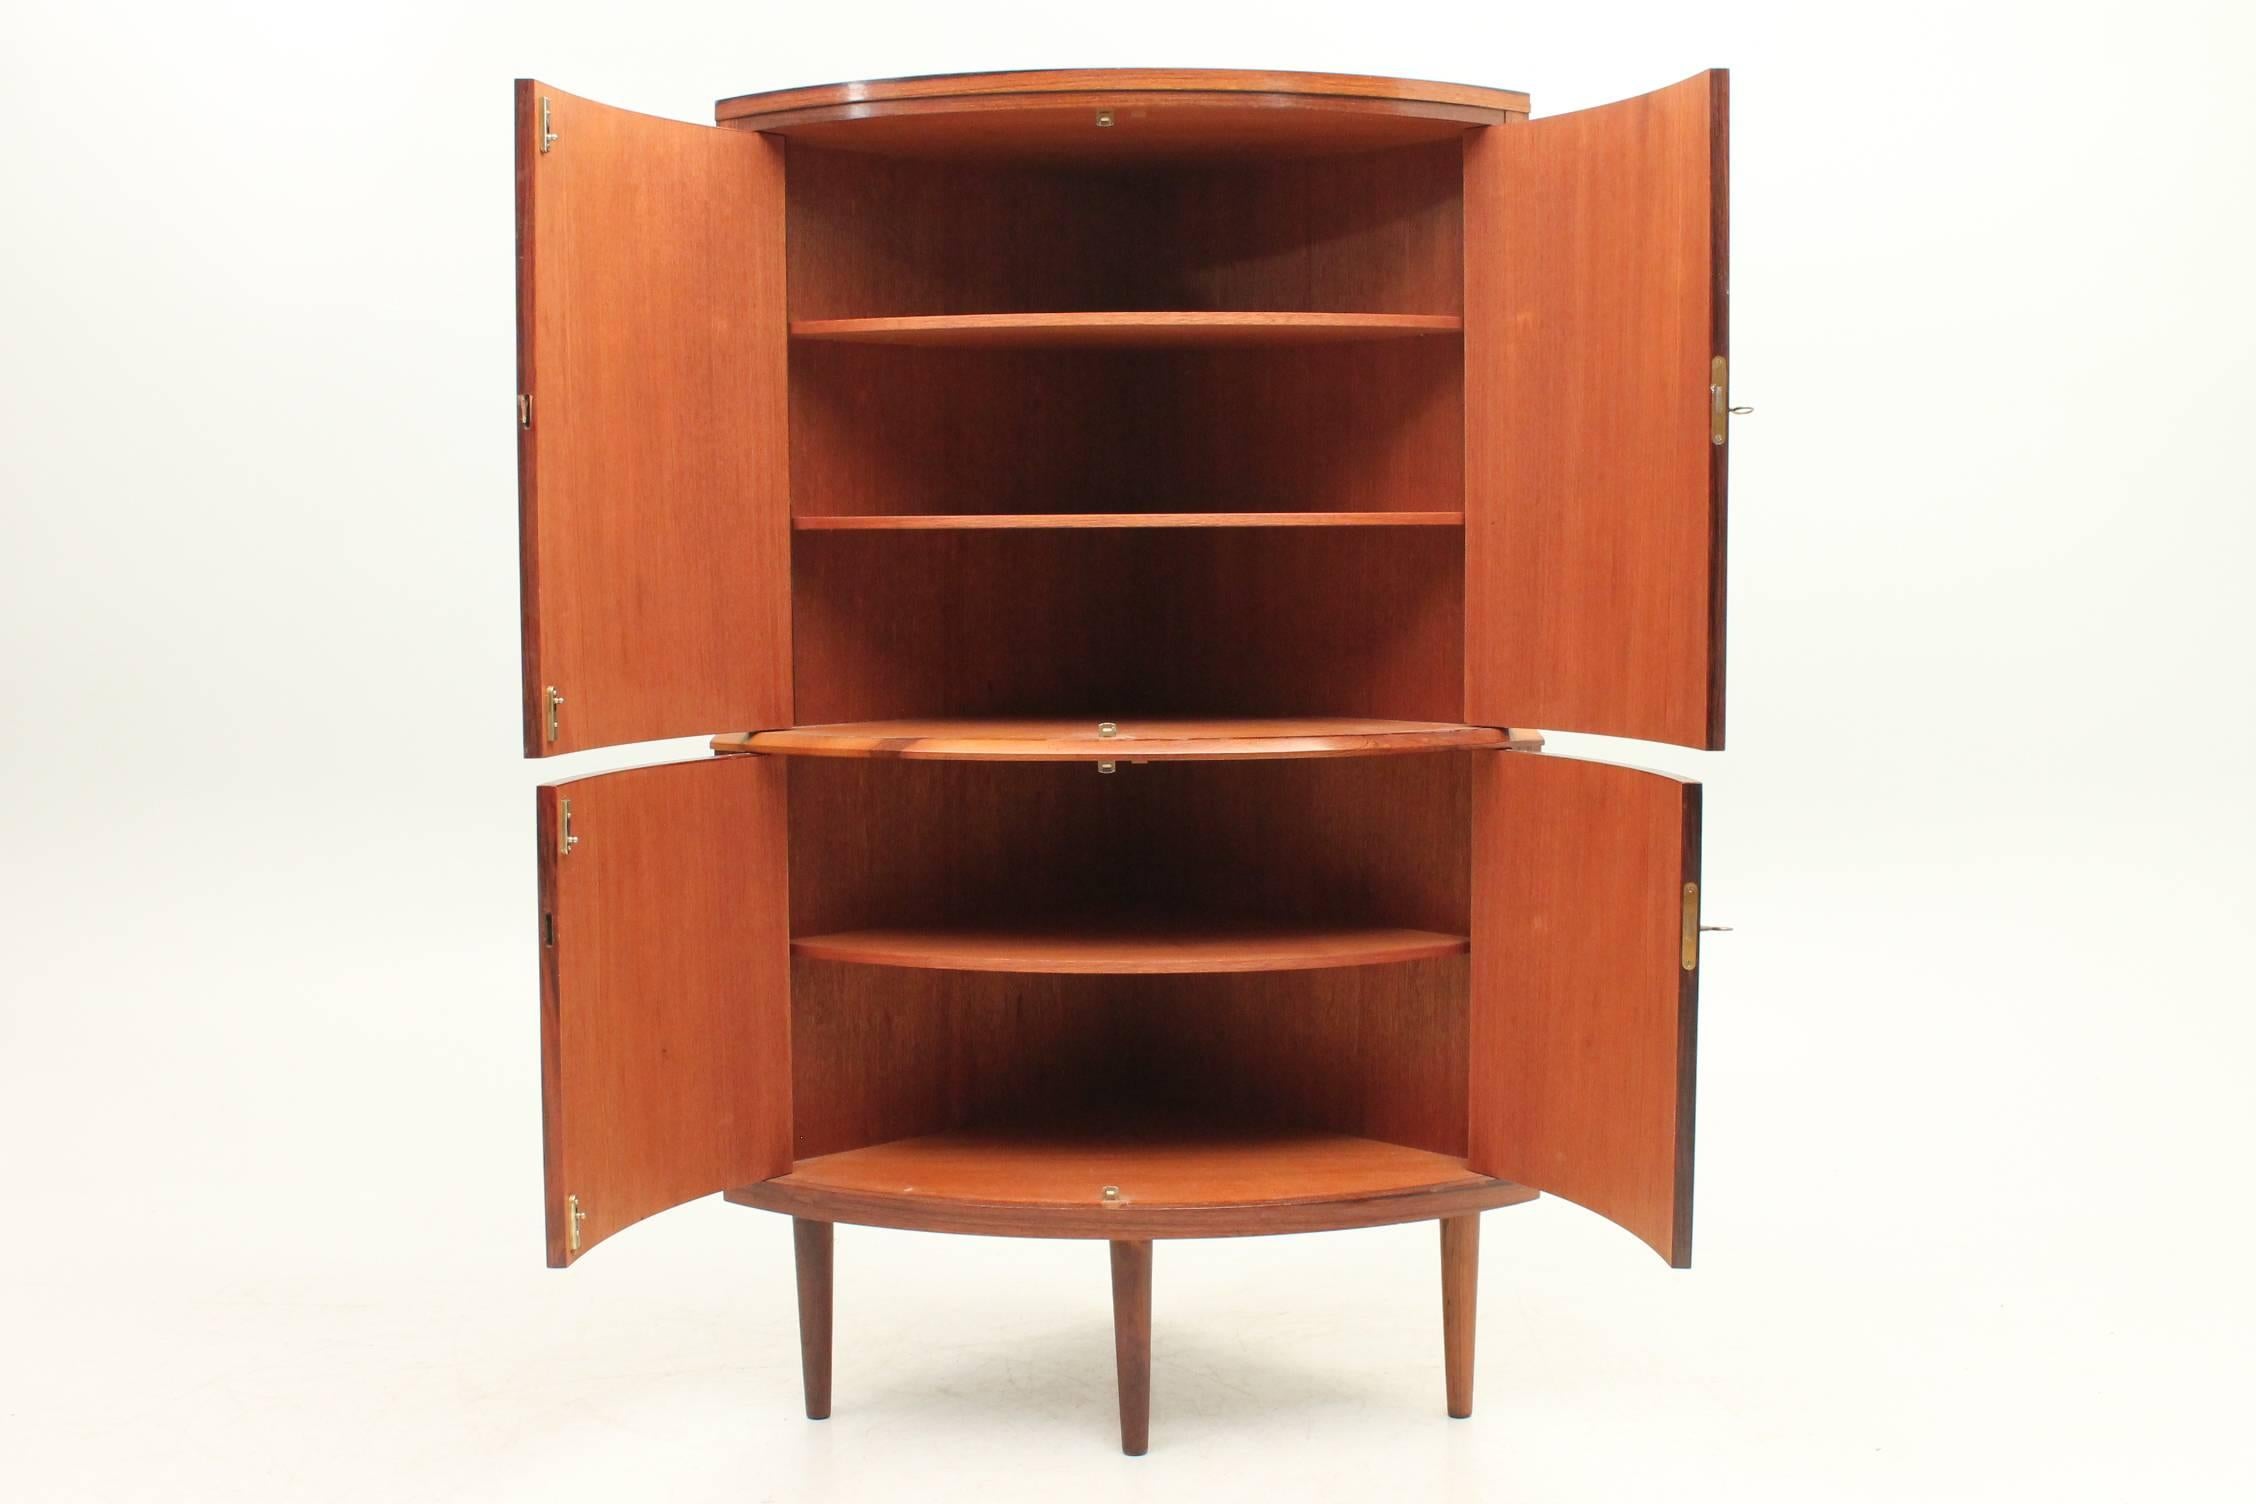 Beautiful rosewood corner cabinet. The front of this cabinet is rounded which makes it look even more unique. The wood features a thick, drastic grain and the shelves on the interior are fully adjustable to meet your storage needs. 